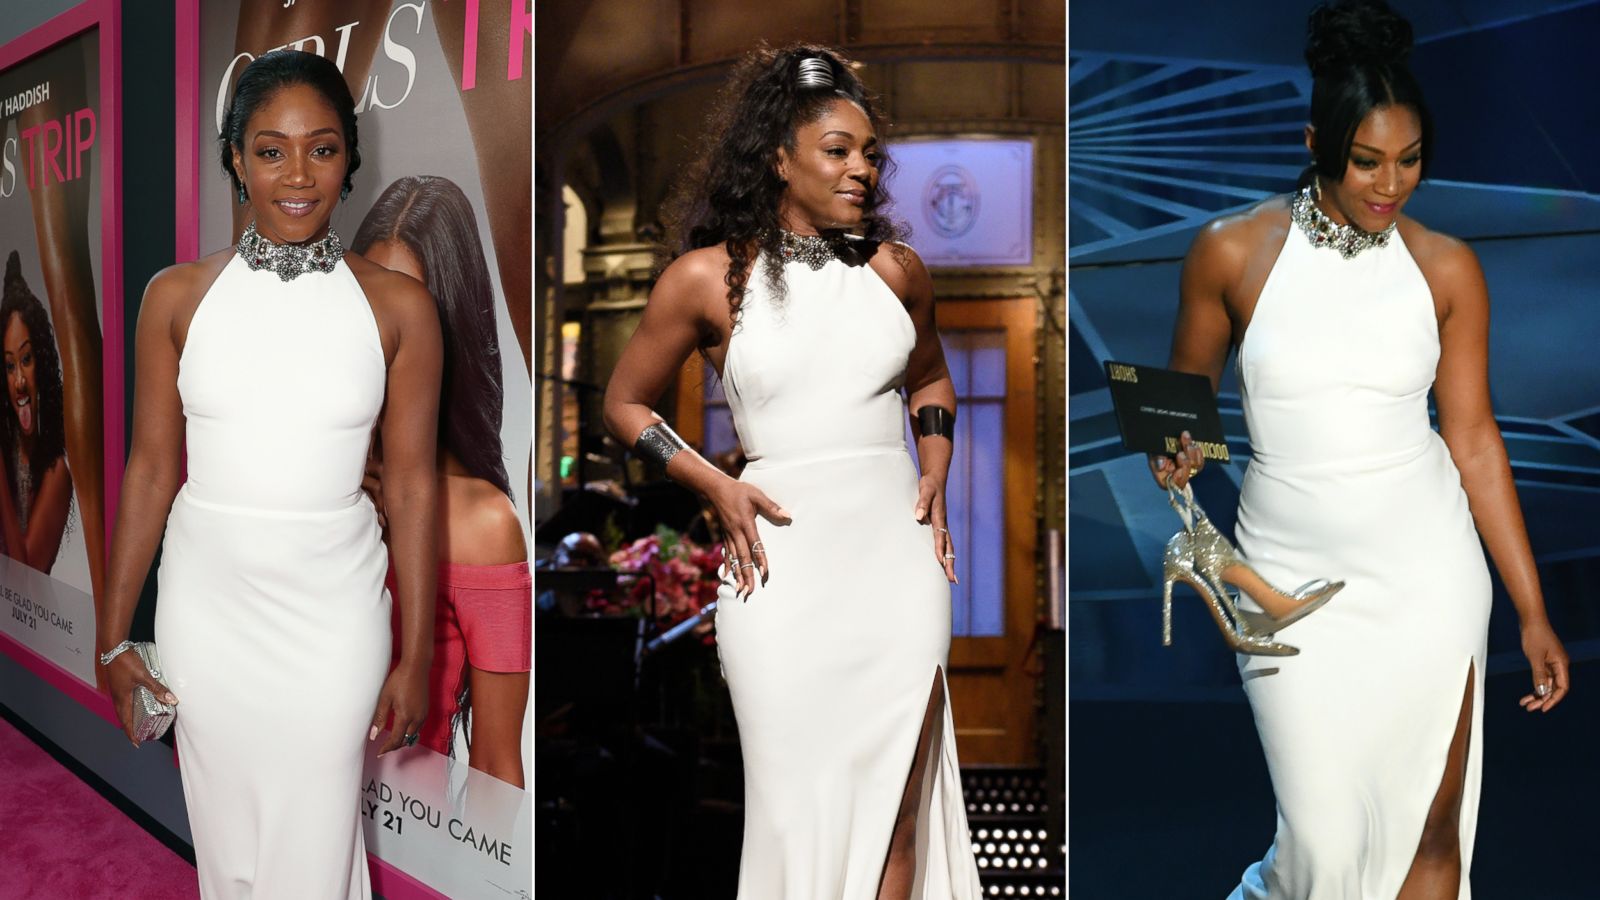 PHOTO: Tiffany Haddish wears a Steve McQueen dress on July 13, 2017 to the premiere of "Girls Trip", left, to host Saturday Night Live on Nov. 11, 2017, center, and again on March 4, 2018 to present at the Academy Awards, right.